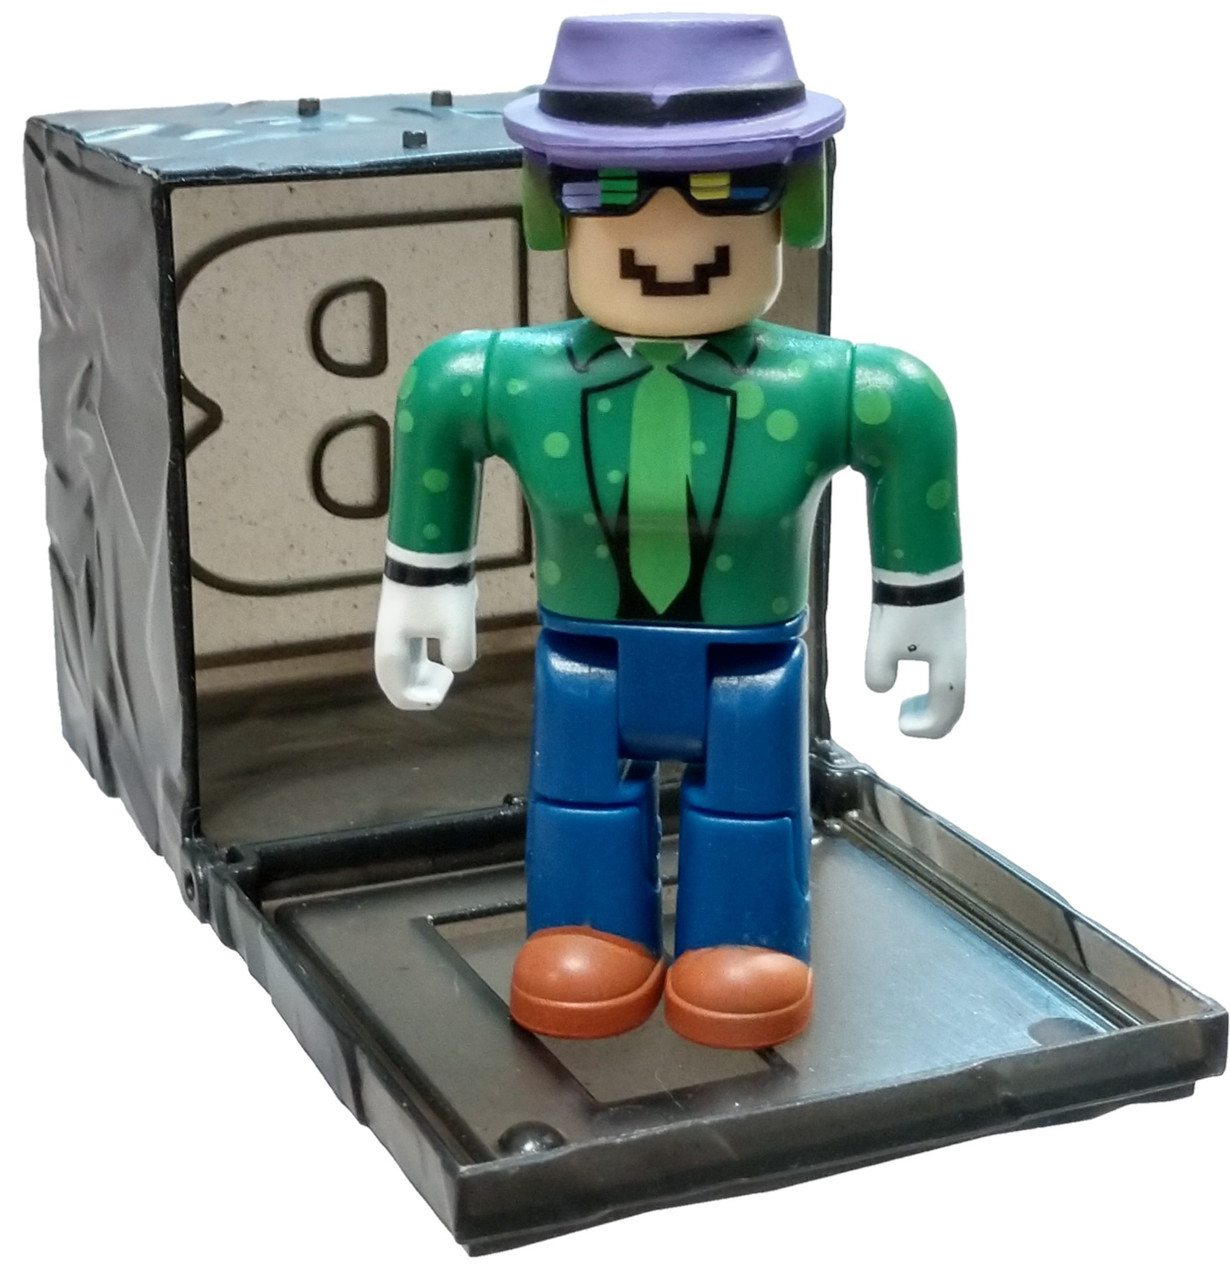 Roblox Series 7 Mrwindy 3 Mini Figure With Black Cube And Online Code Loose Jazwares Toywiz - roblox toys series 3 blue blind boxes codes full case